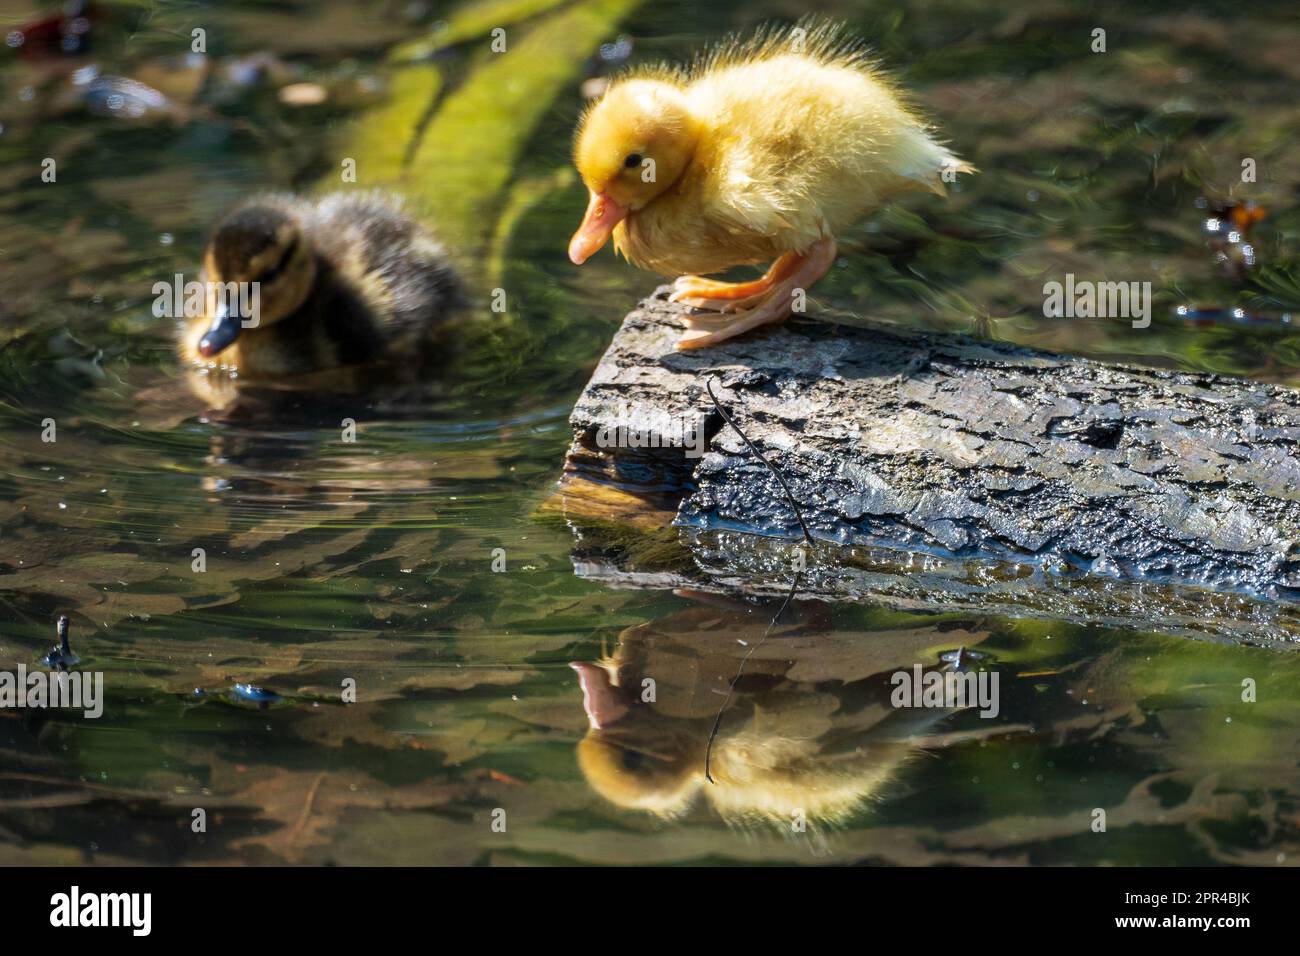 Baby duckling on floating log in urban pond. Stock Photo